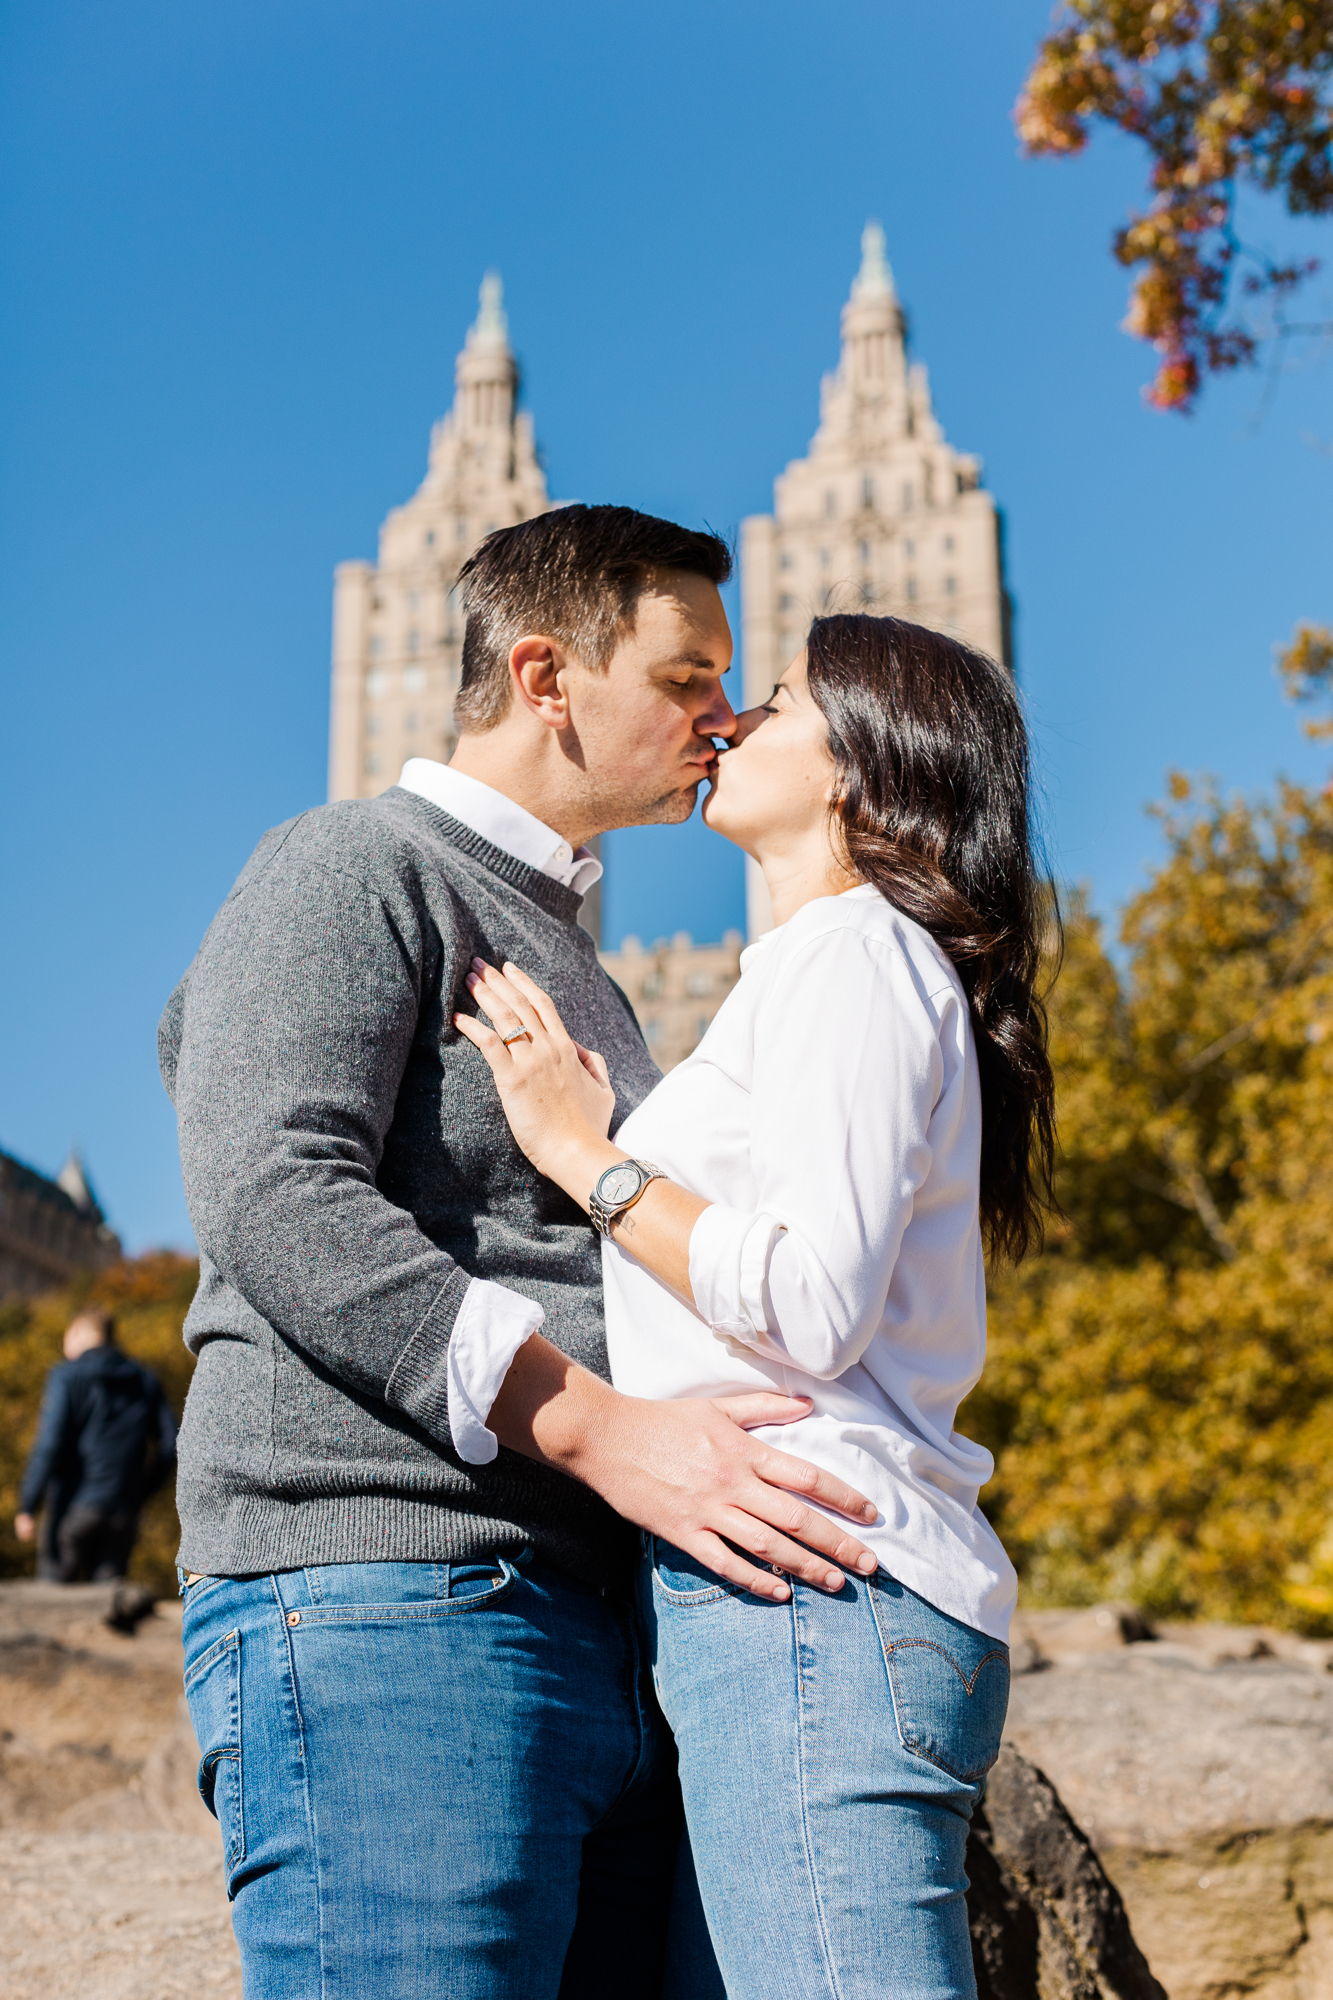 Jaw-Dropping Upper West Side Engagement Photo Shoot in NYC